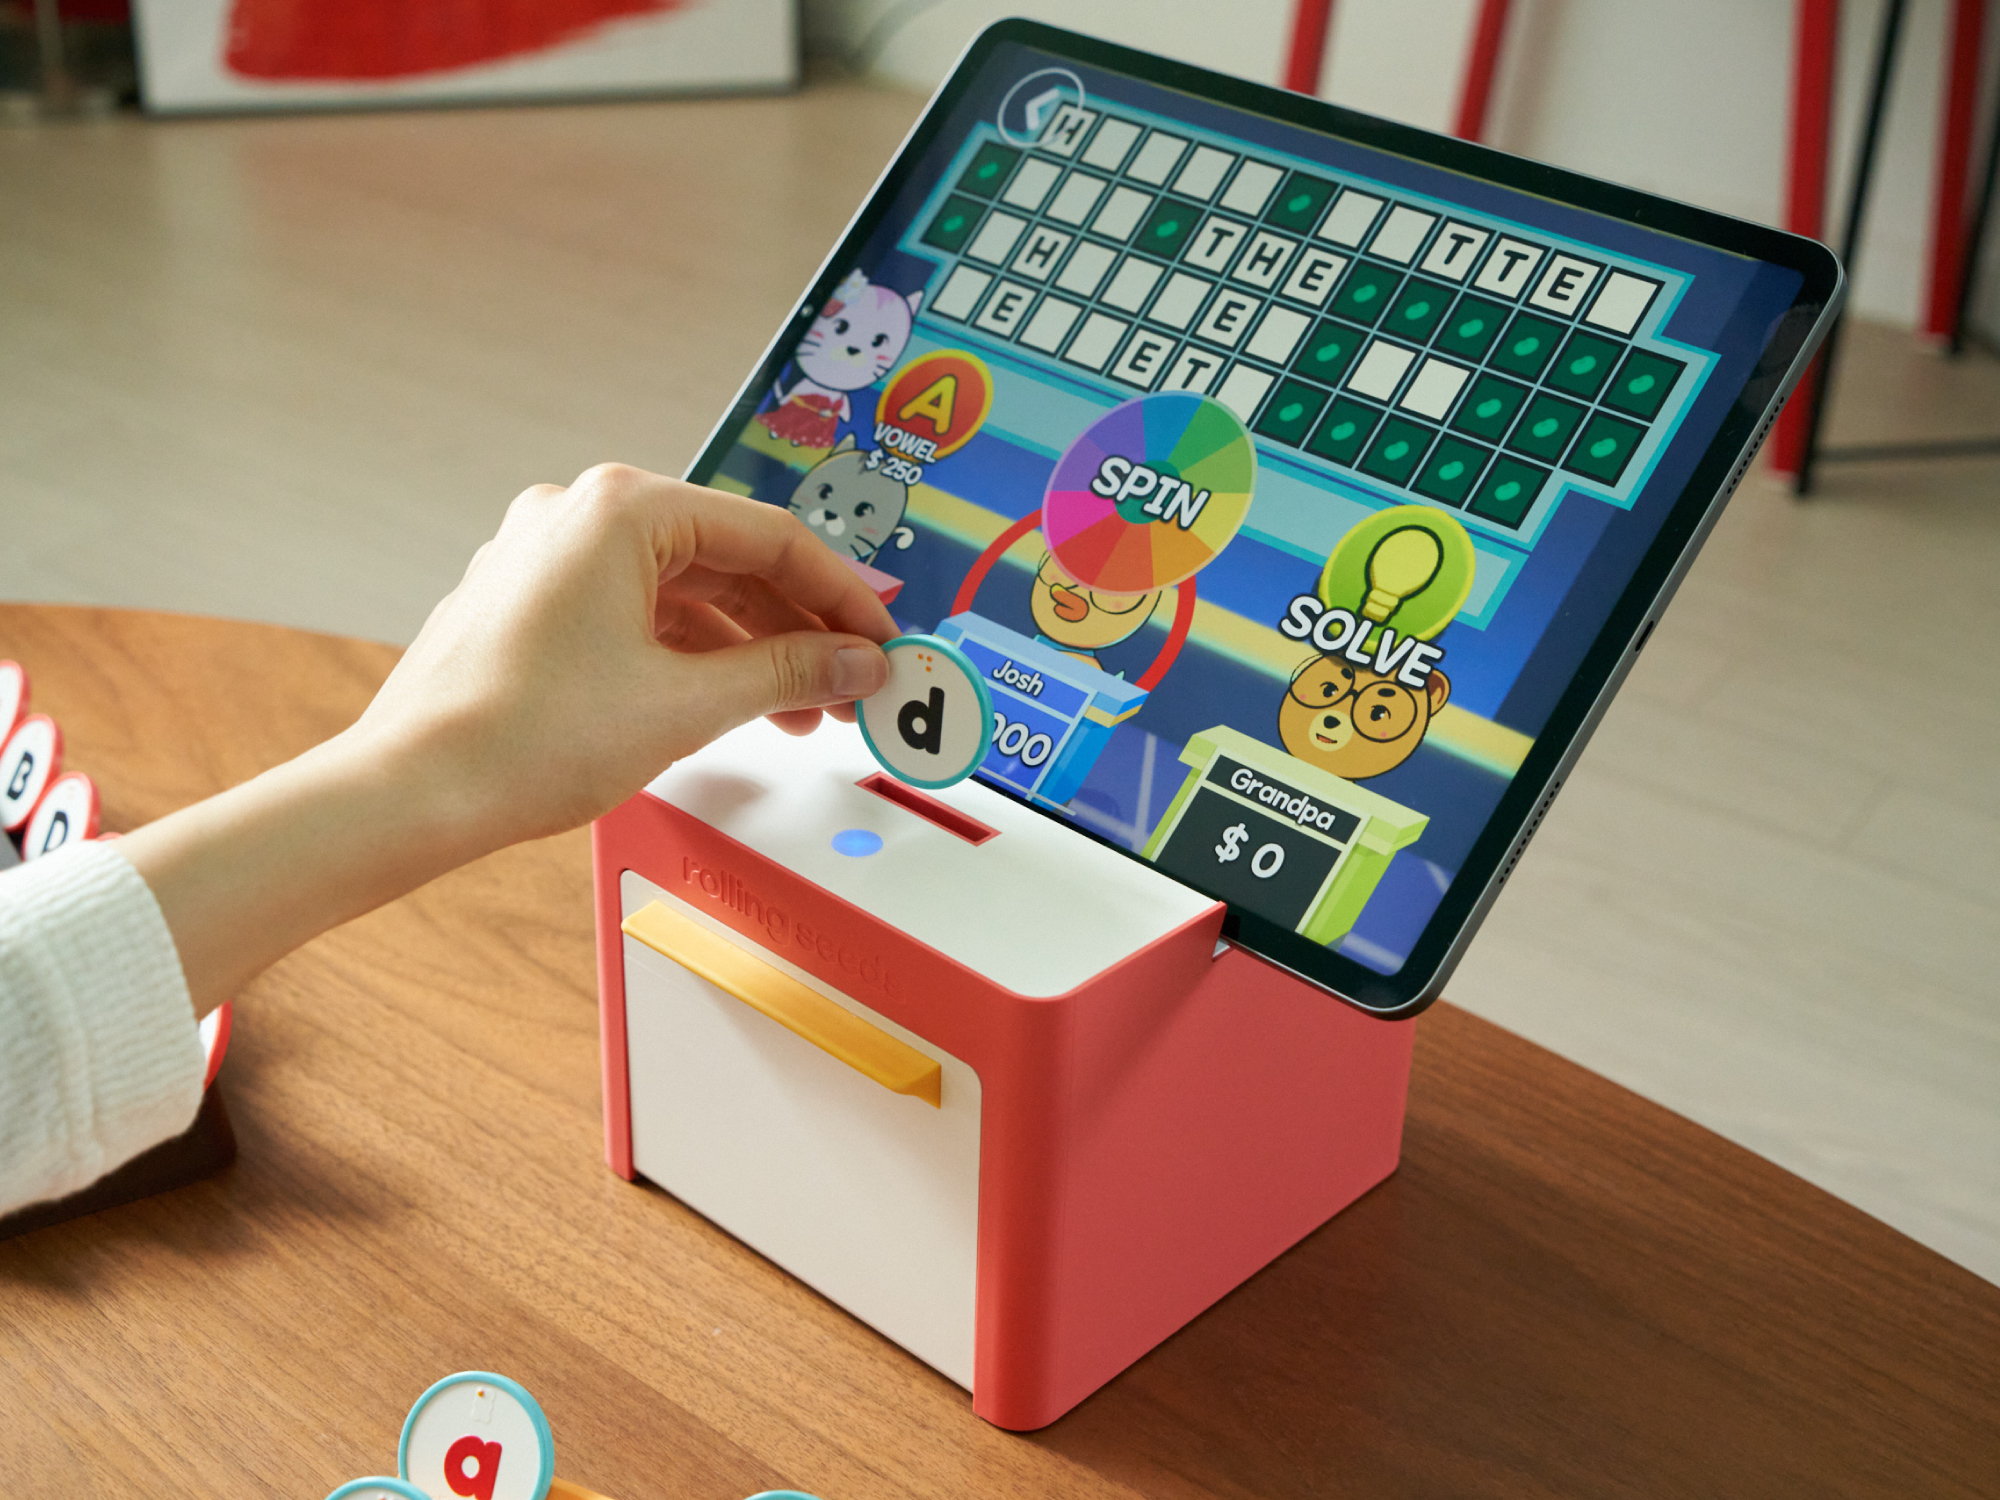 rollingseeds smart game console